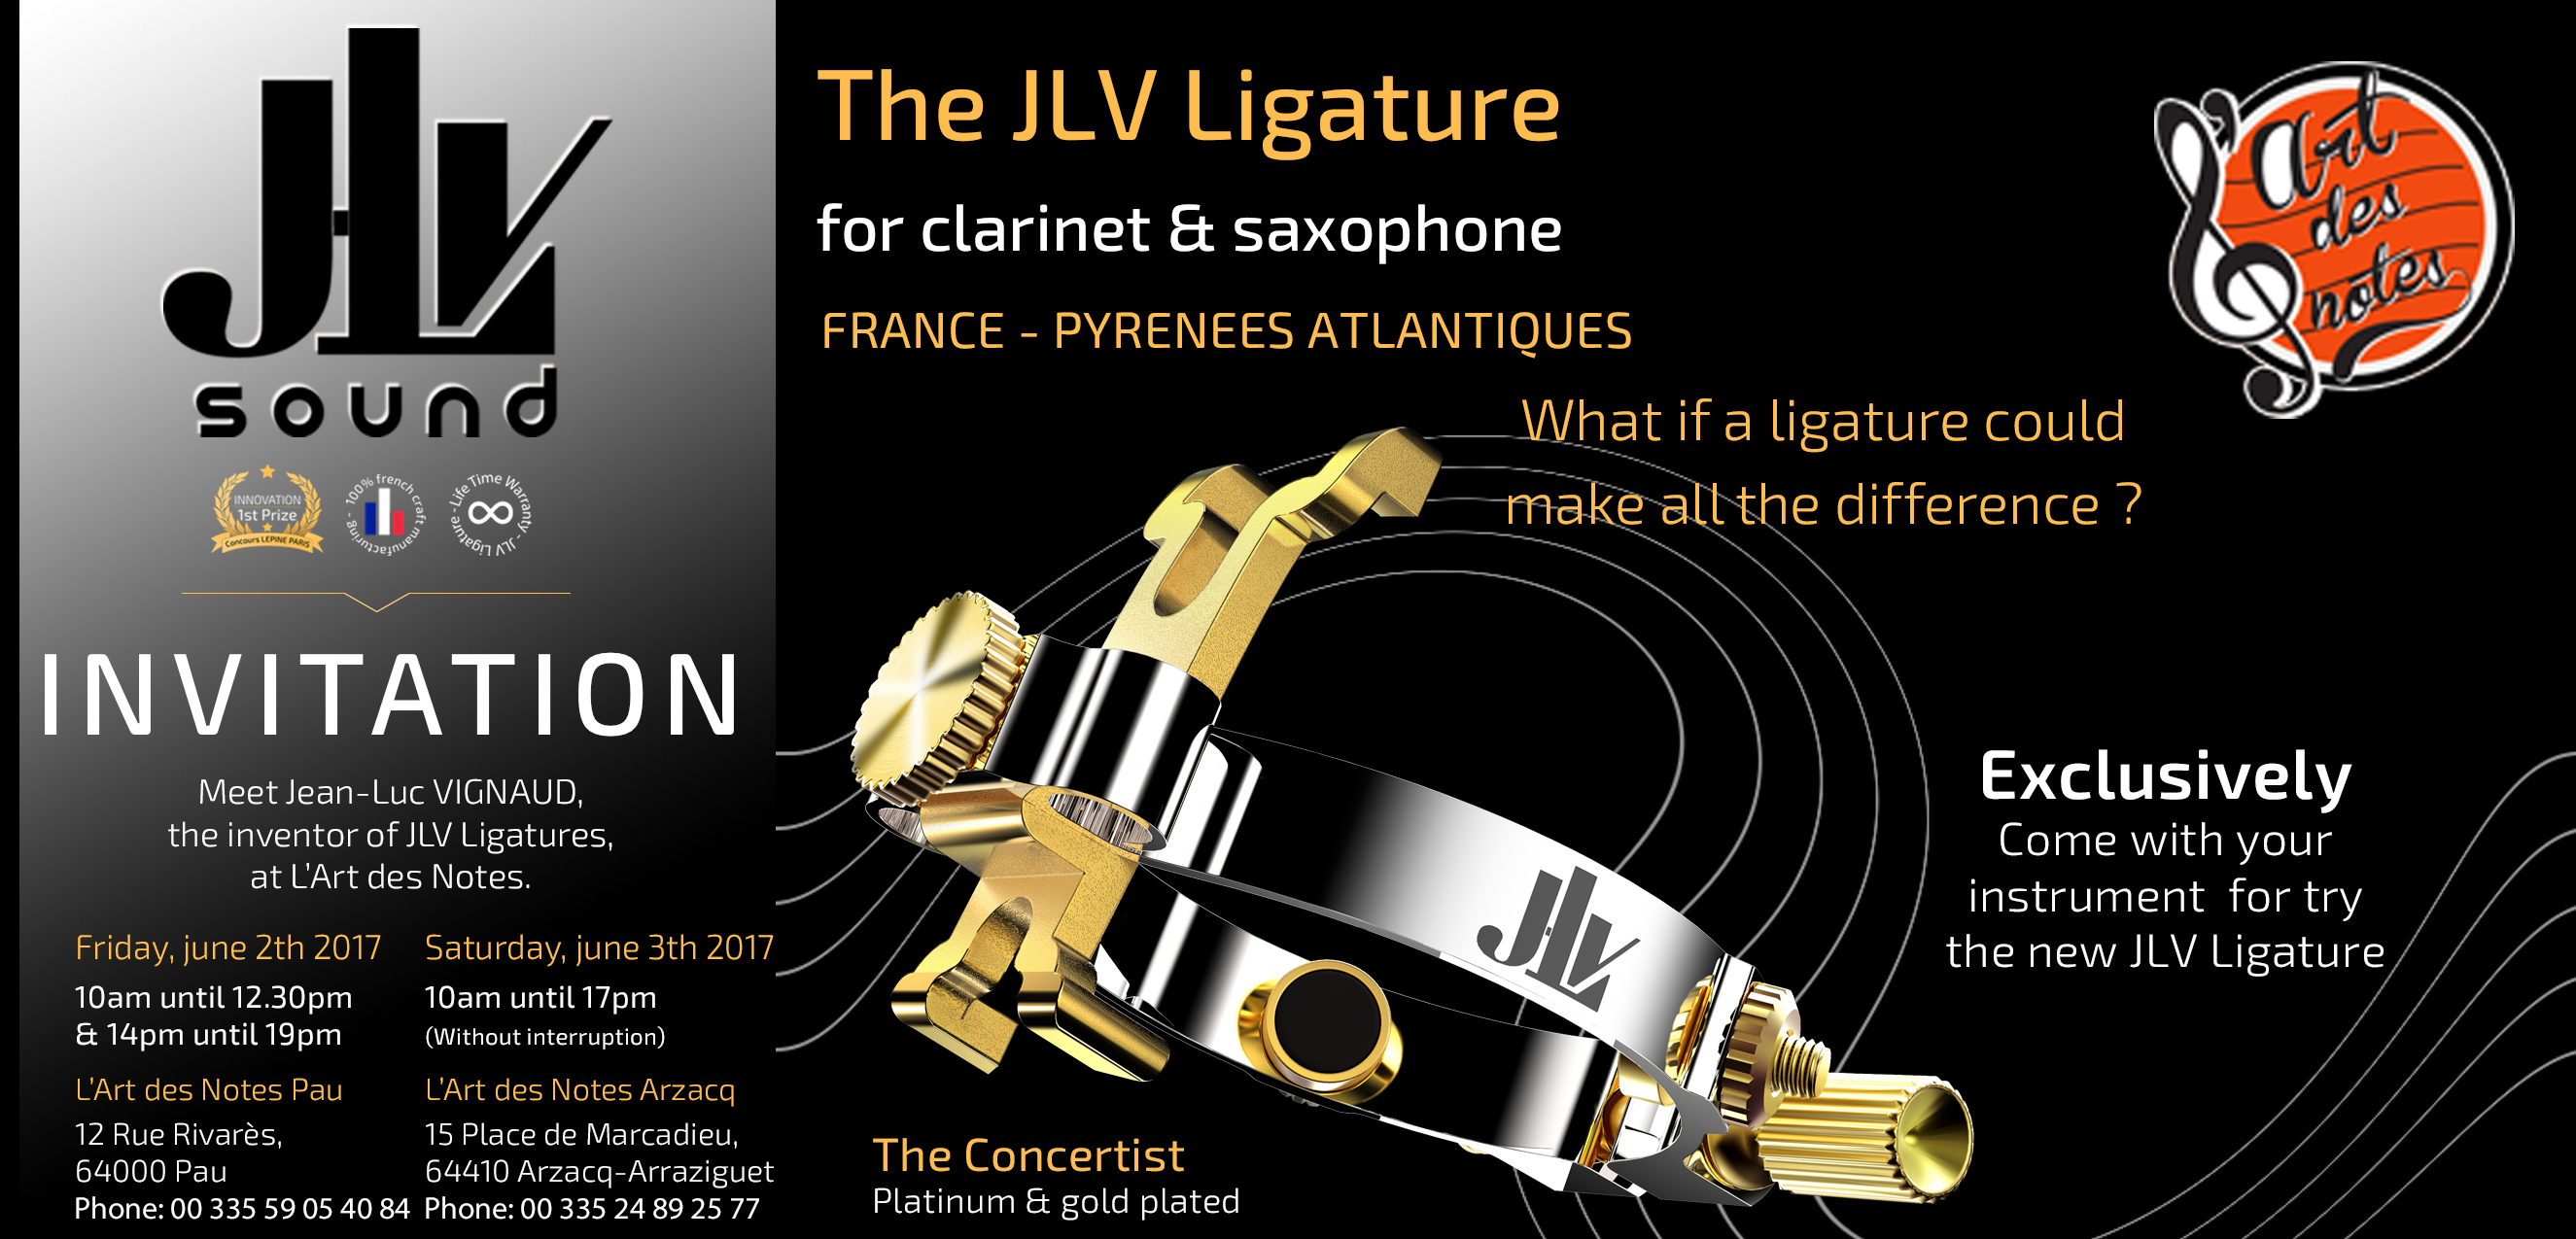 Event in Pau and Arzacq on 2 and 3 June 2017 with the inventor of the JLV Ligatures